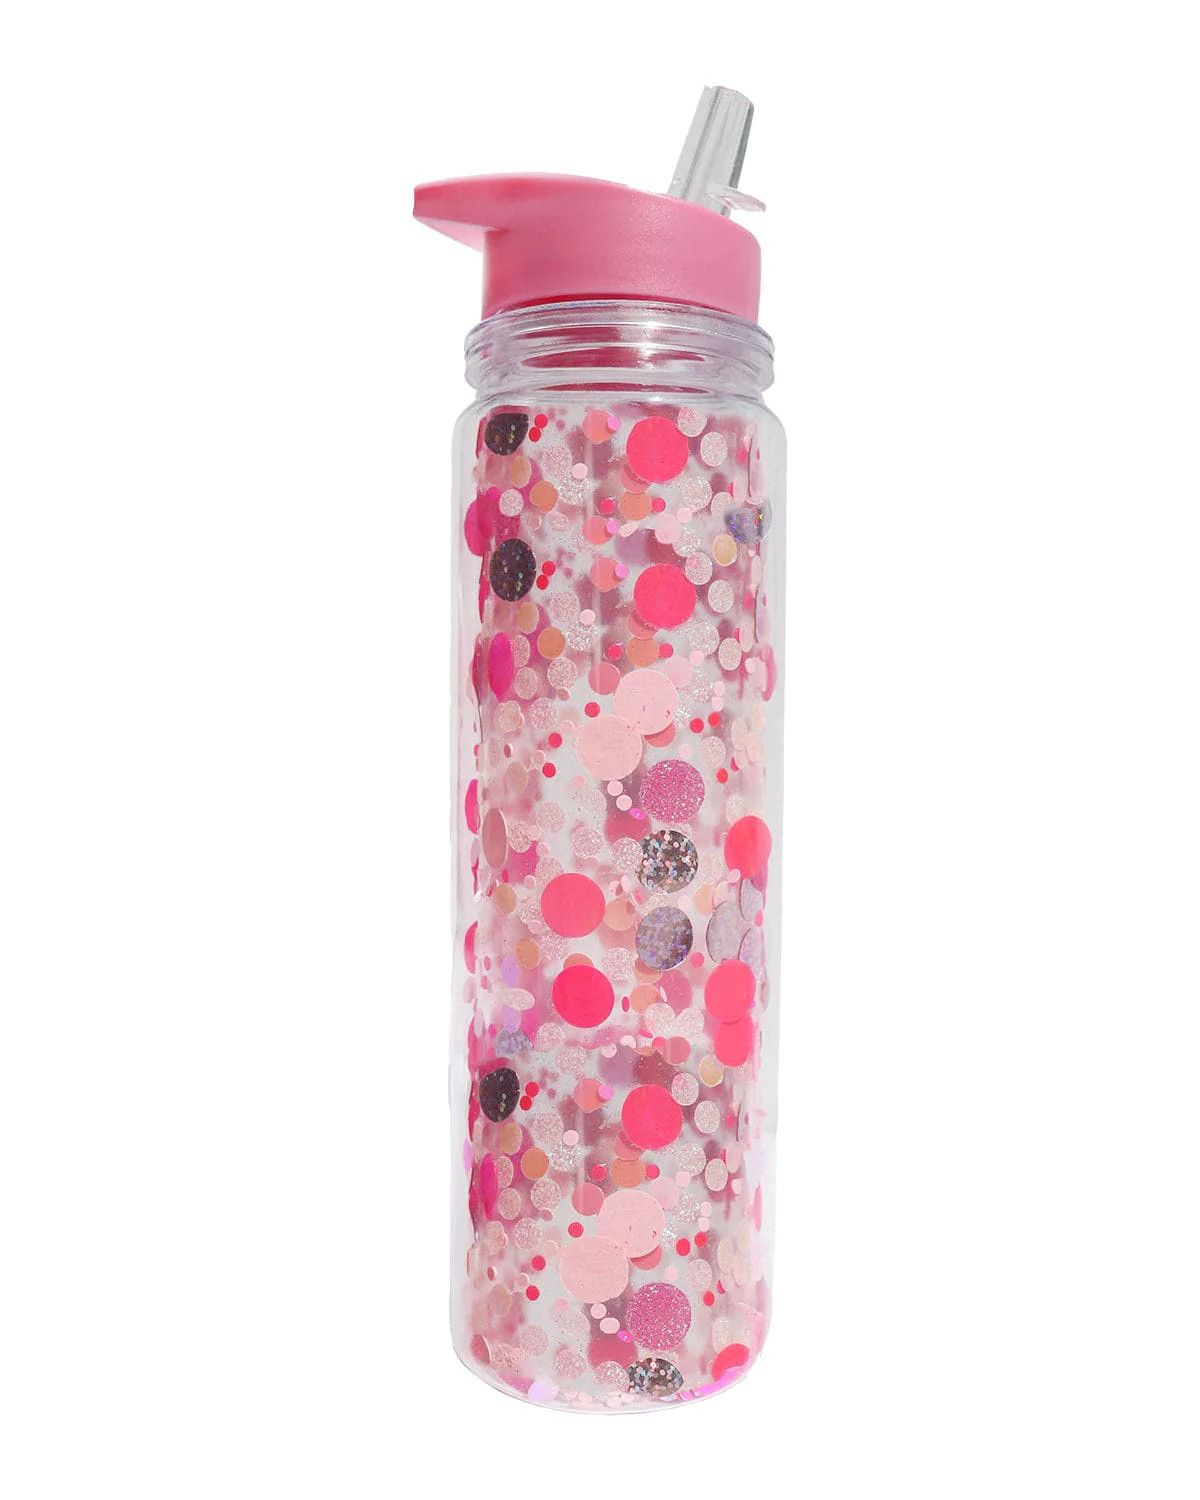 Pink Party Confetti Water Bottle with Straw | Packed Party